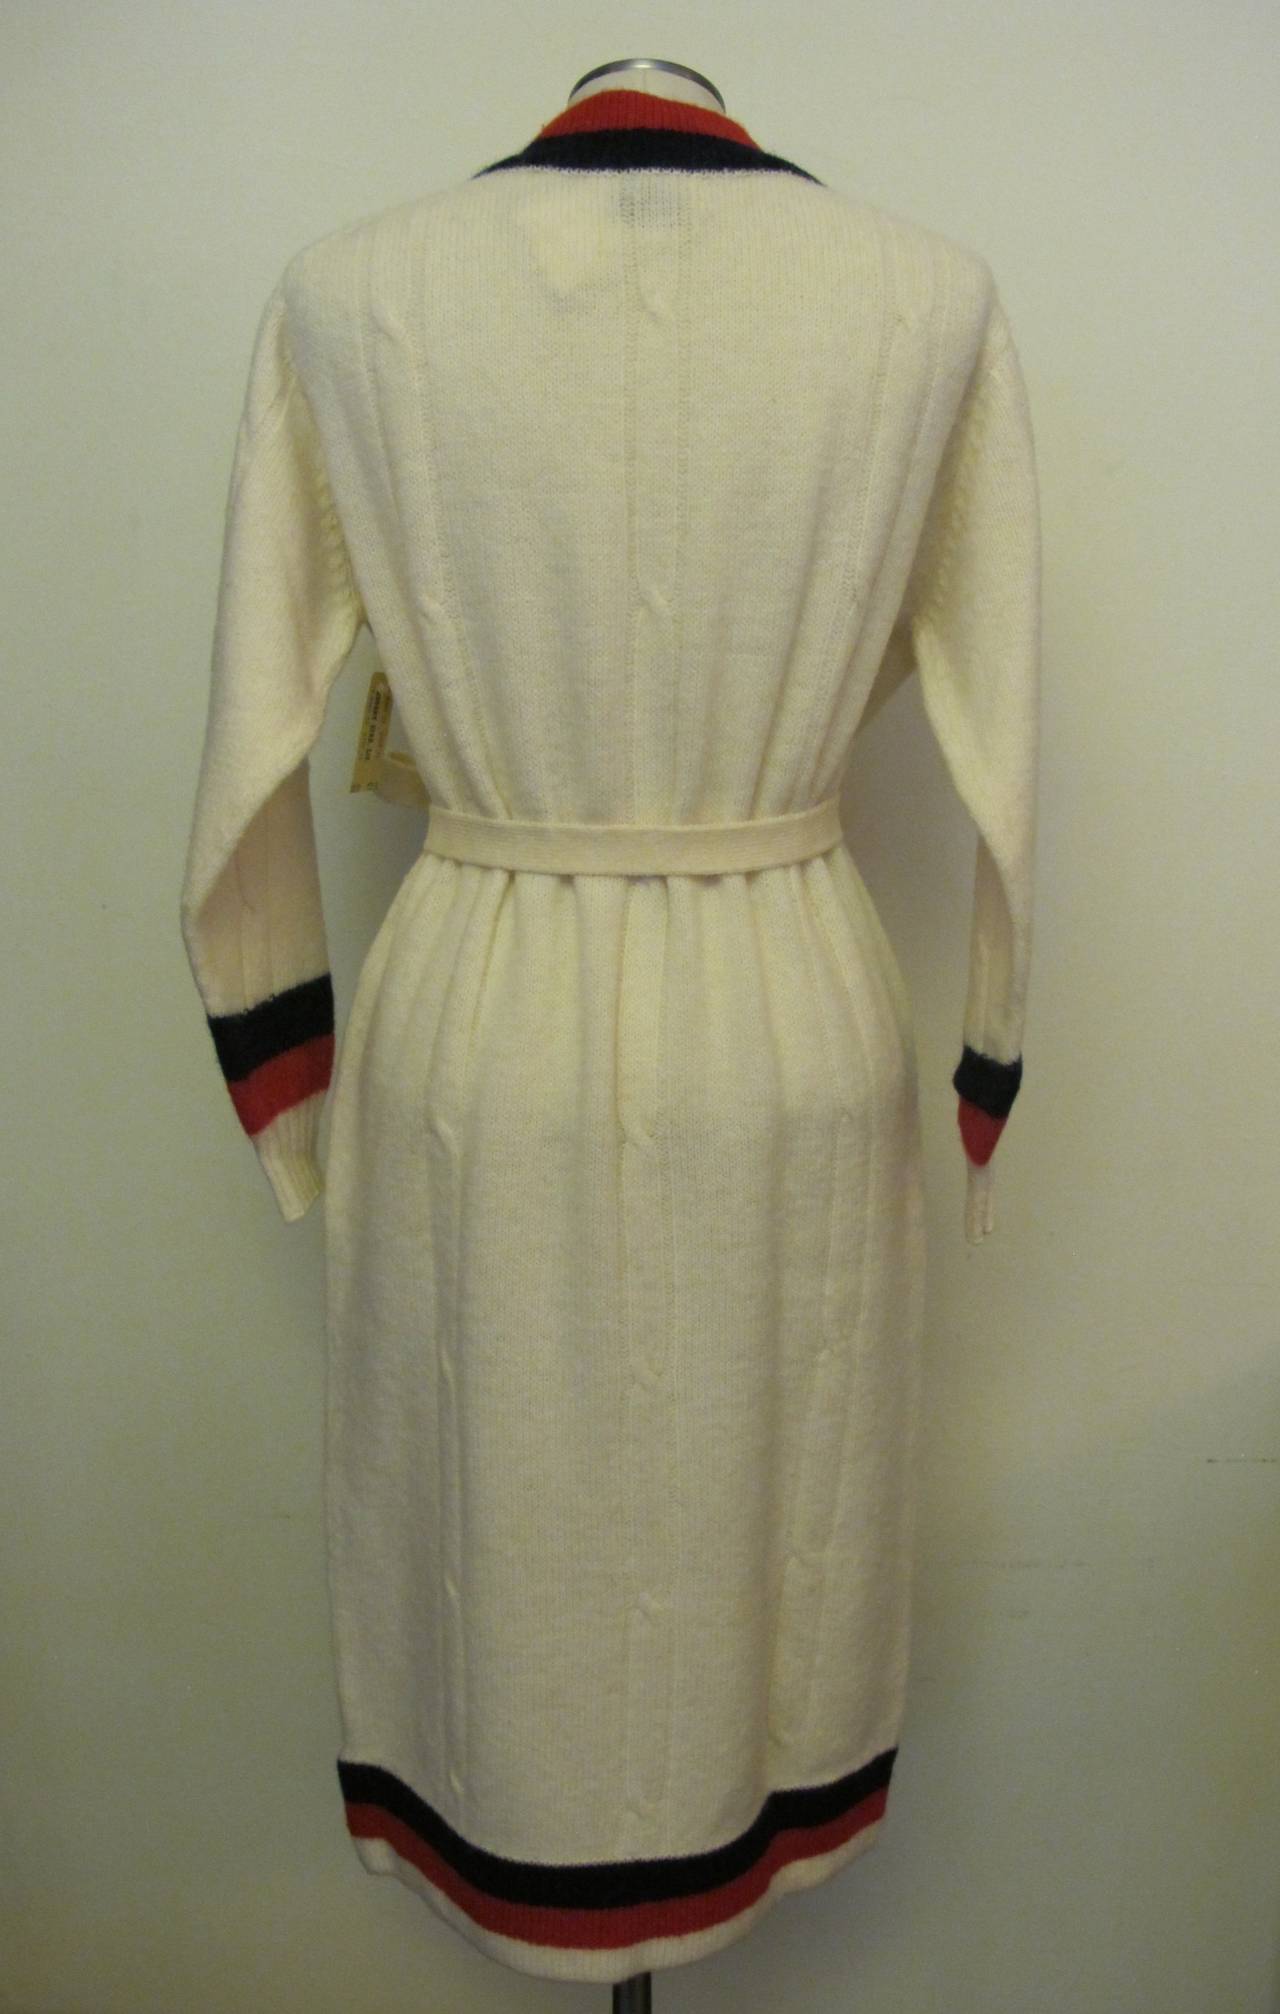 New Pringle 1950's Sweater Dress for Robert Kirk, Ltd. In New Condition For Sale In San Francisco, CA